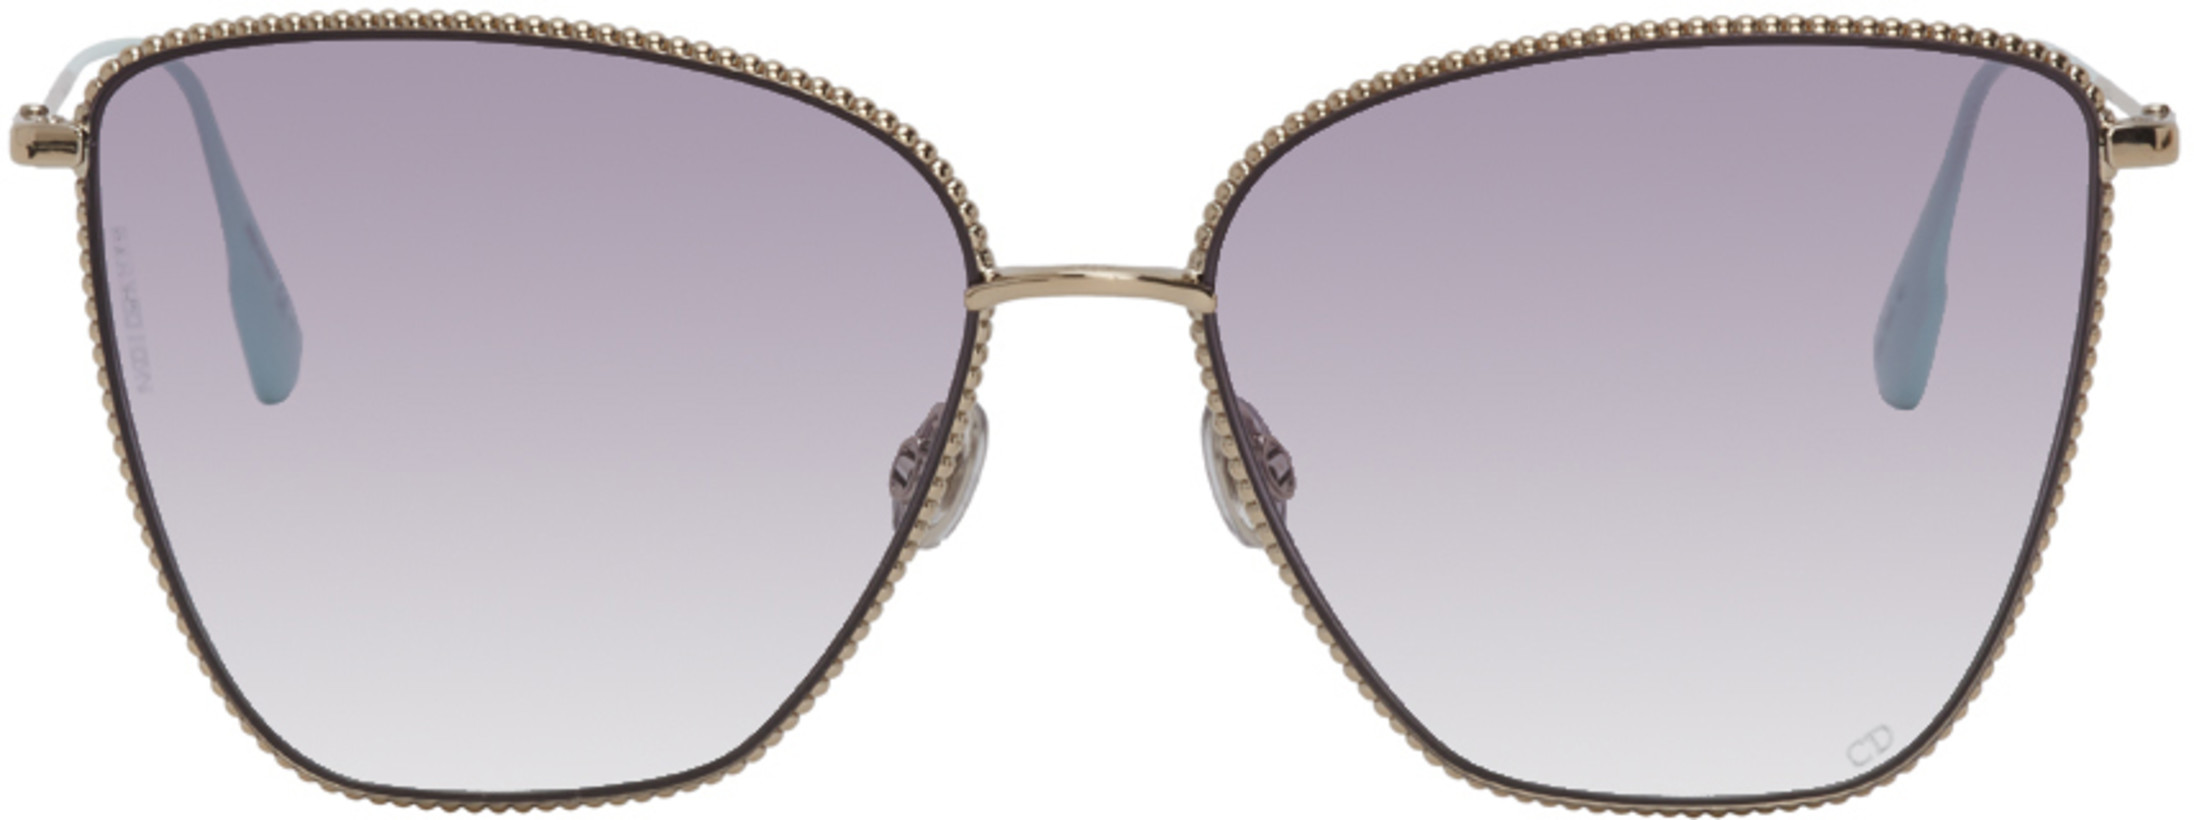 dior-sunglasses-flat-mirror-as-low-as-75-fold-good-price-into-thin-face-god-2019-5-22-2020-5-22